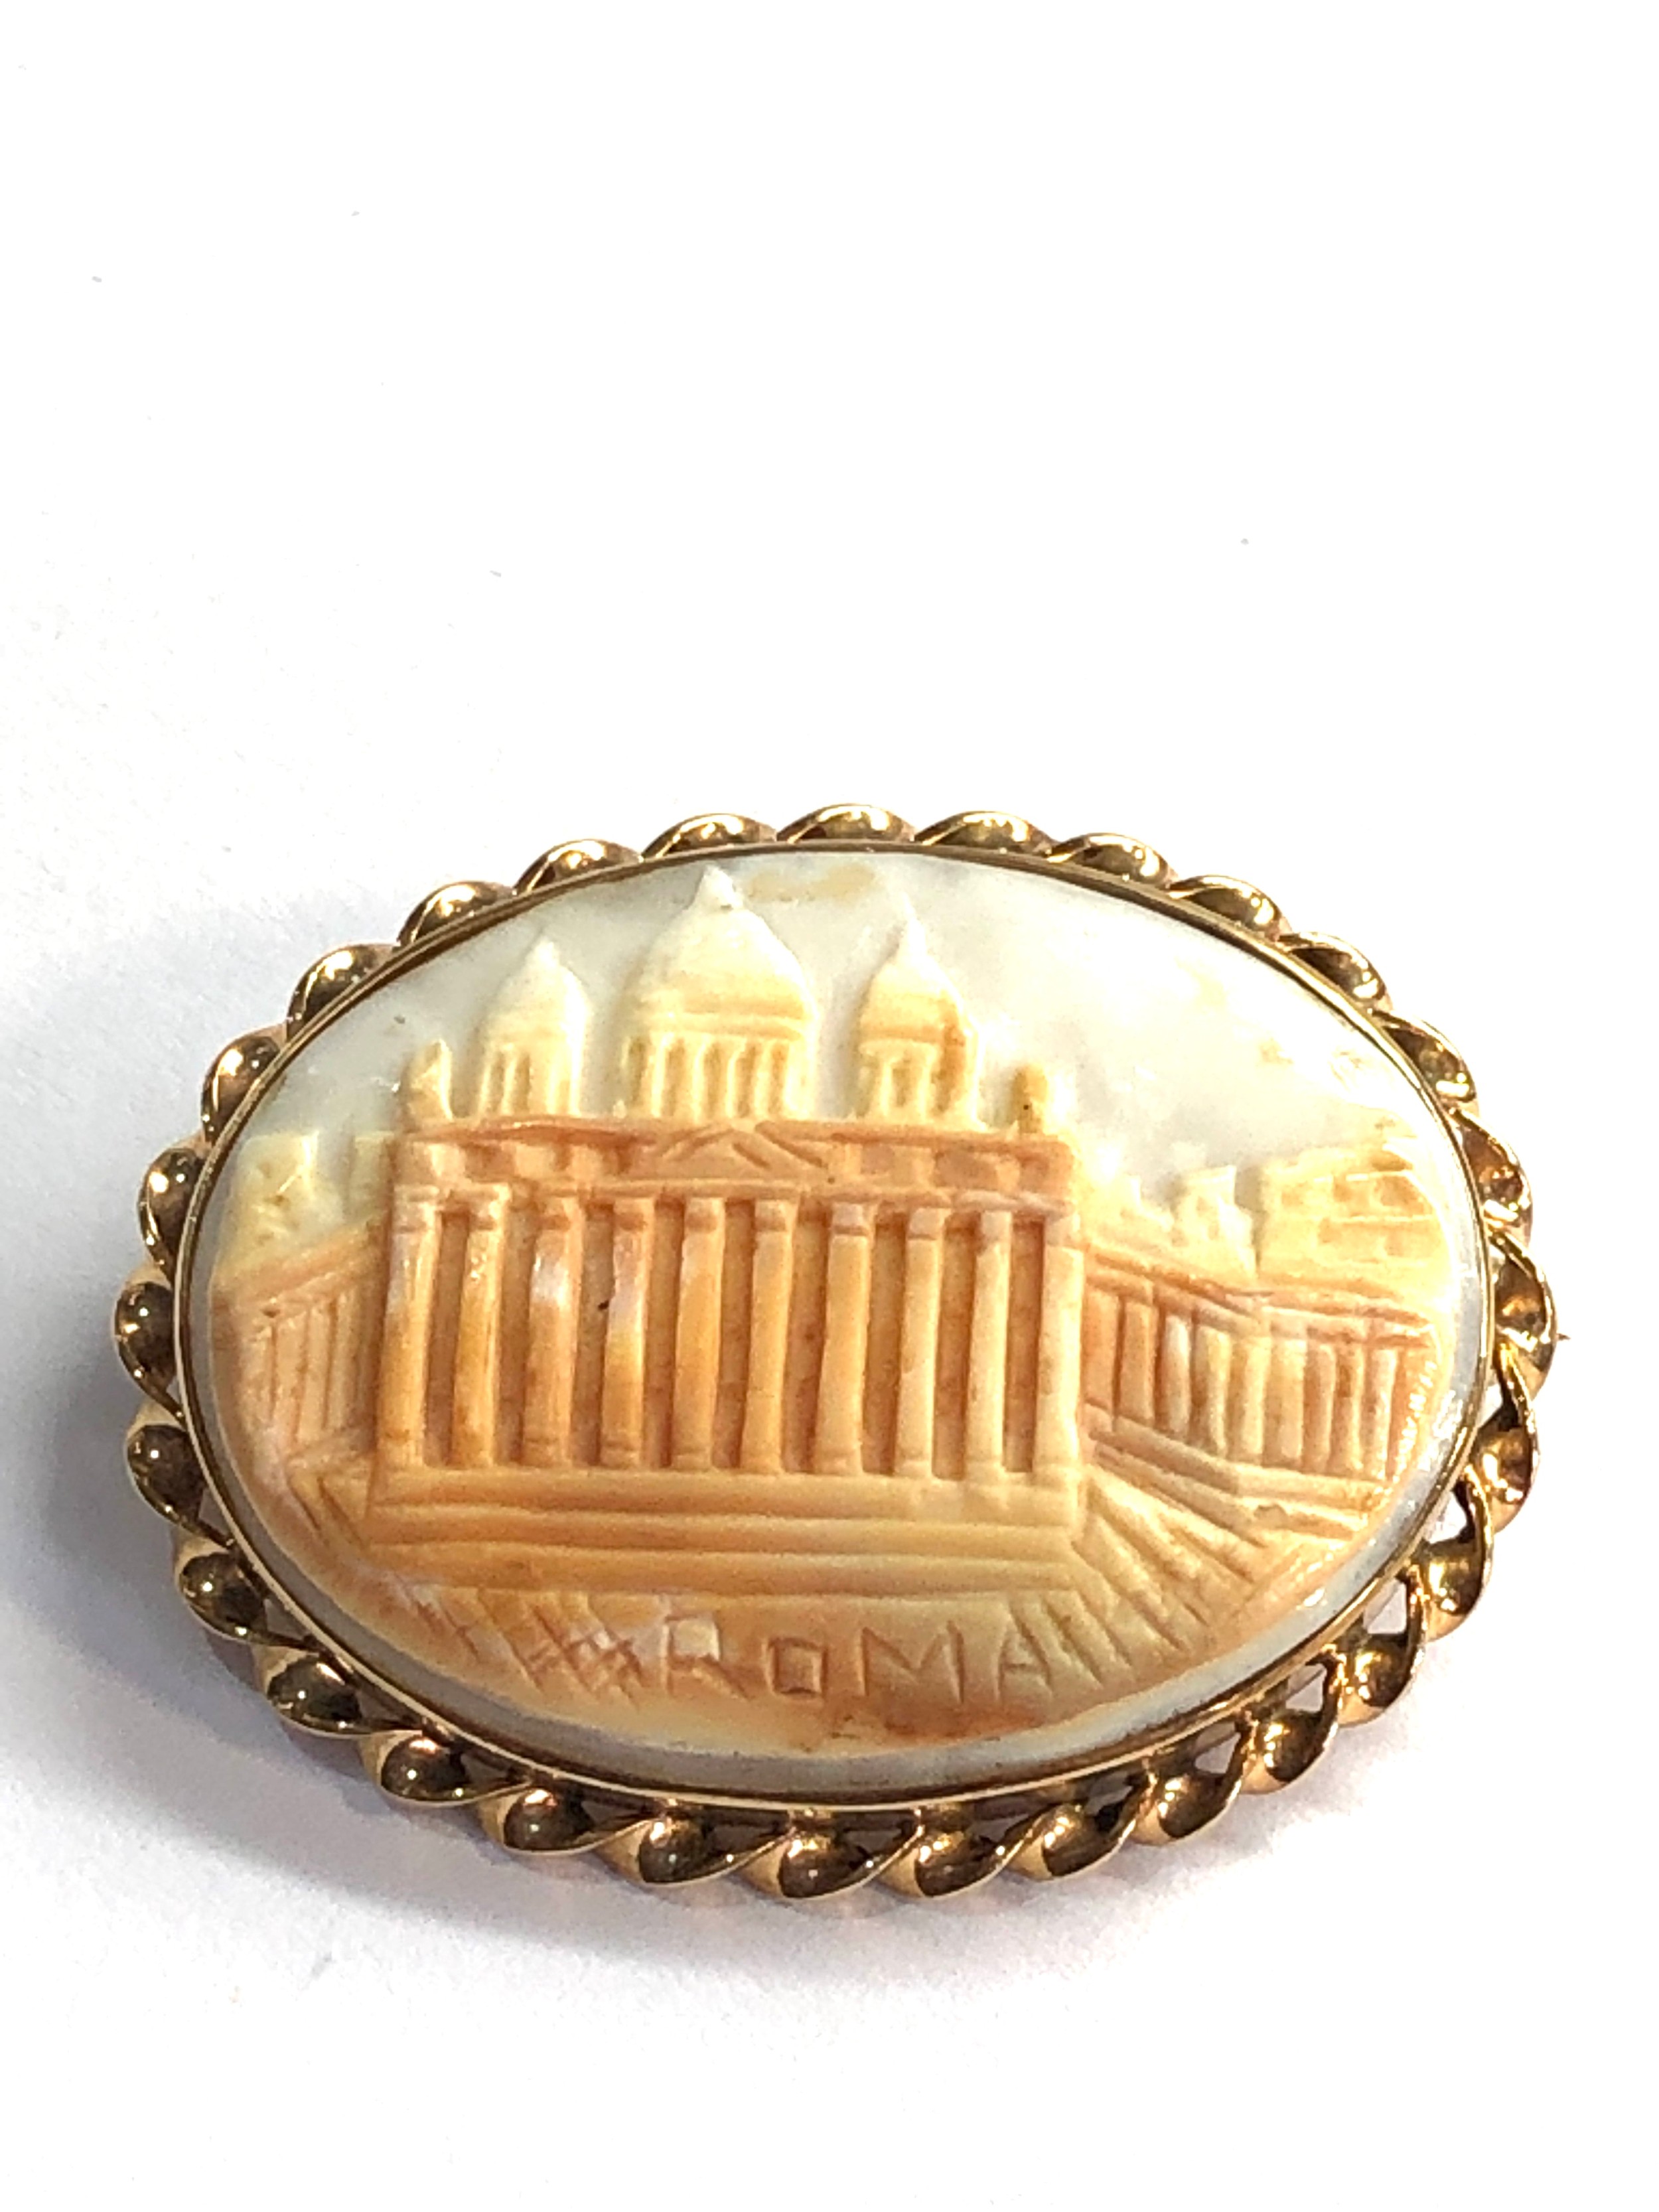 Antique 9ct Gold cameo brooch (11g) measures approx 4.2cm by 3.5cm